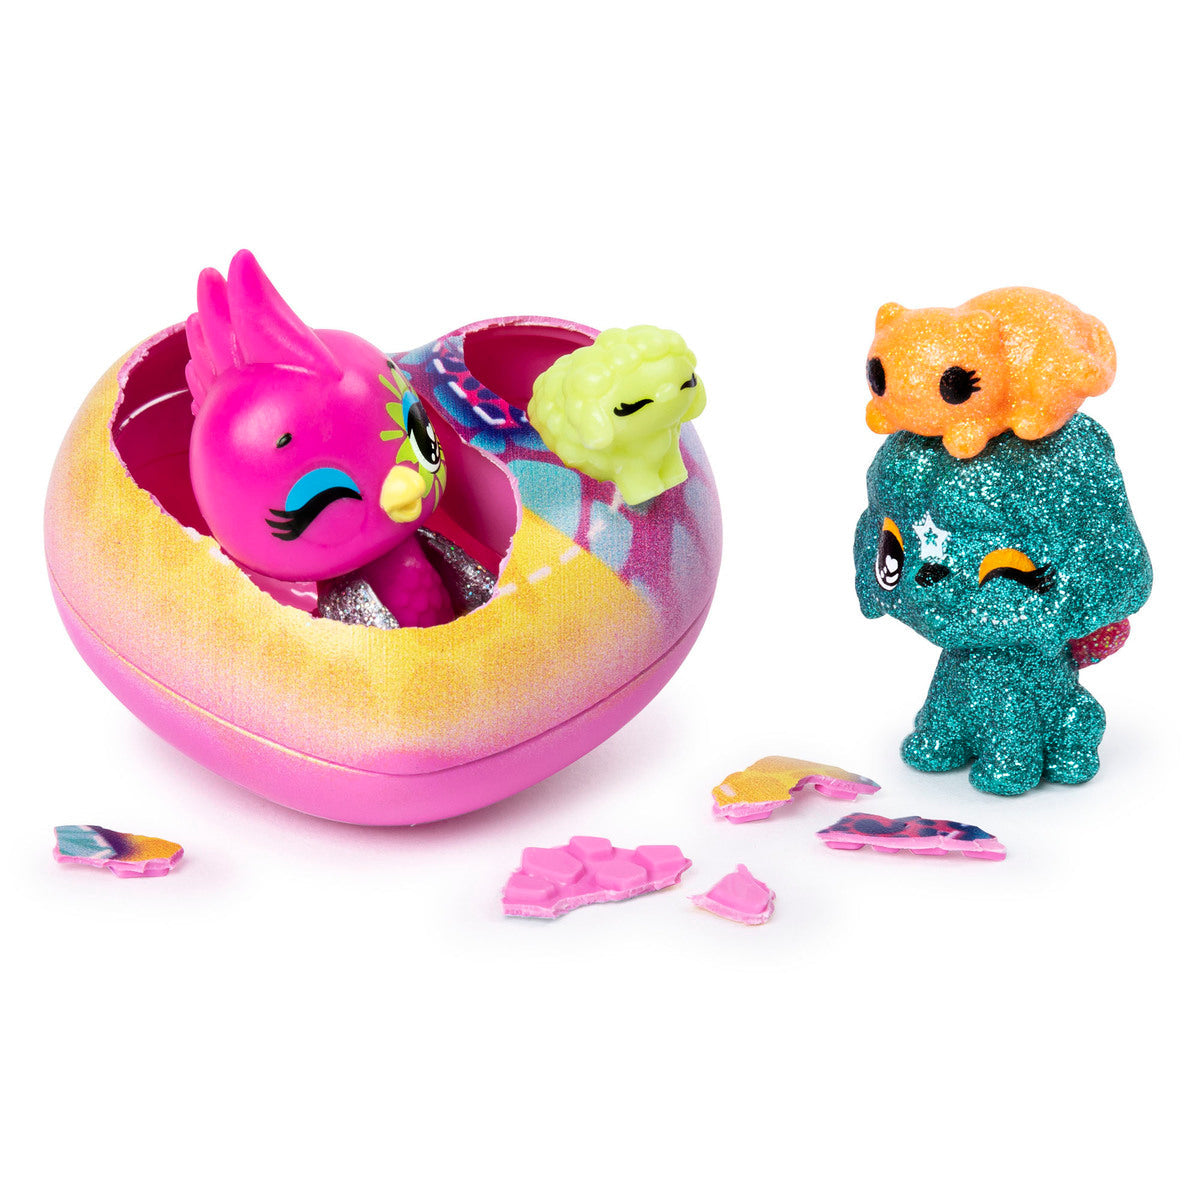 Hatchimals CollEGGtibles Pet Obsessed HatchiPets (Styles Vary)